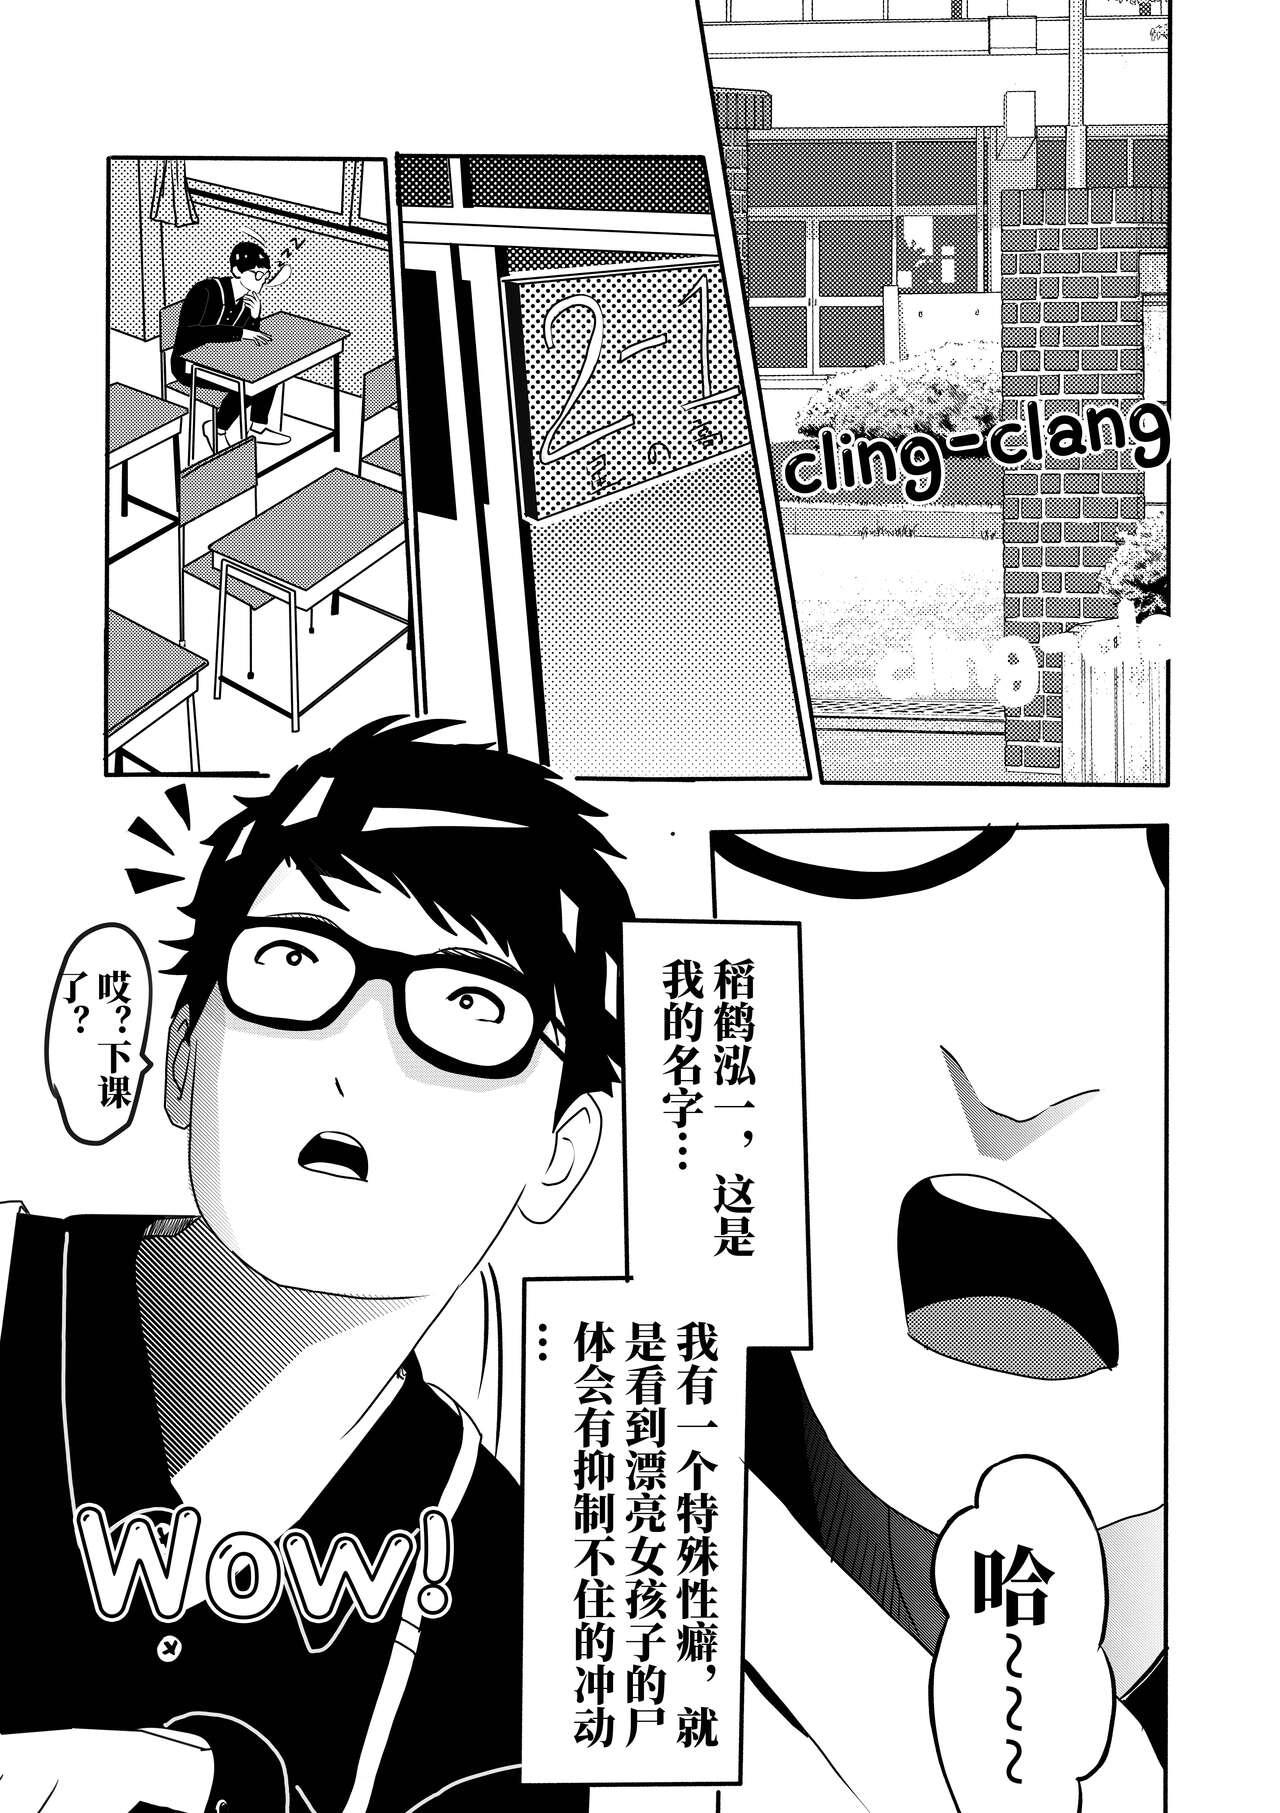 Hidden Camera [KAO.YELLOW STUDIO (T.C.X)] I must be out of my mind to fall in love with SAORI, the Snuff Queen Ch.1-16 | 想与冰恋女王纱织同学谈恋爱的我脑子一定有问题 第1-16话 [Chinese] - Original Old And Young - Picture 3